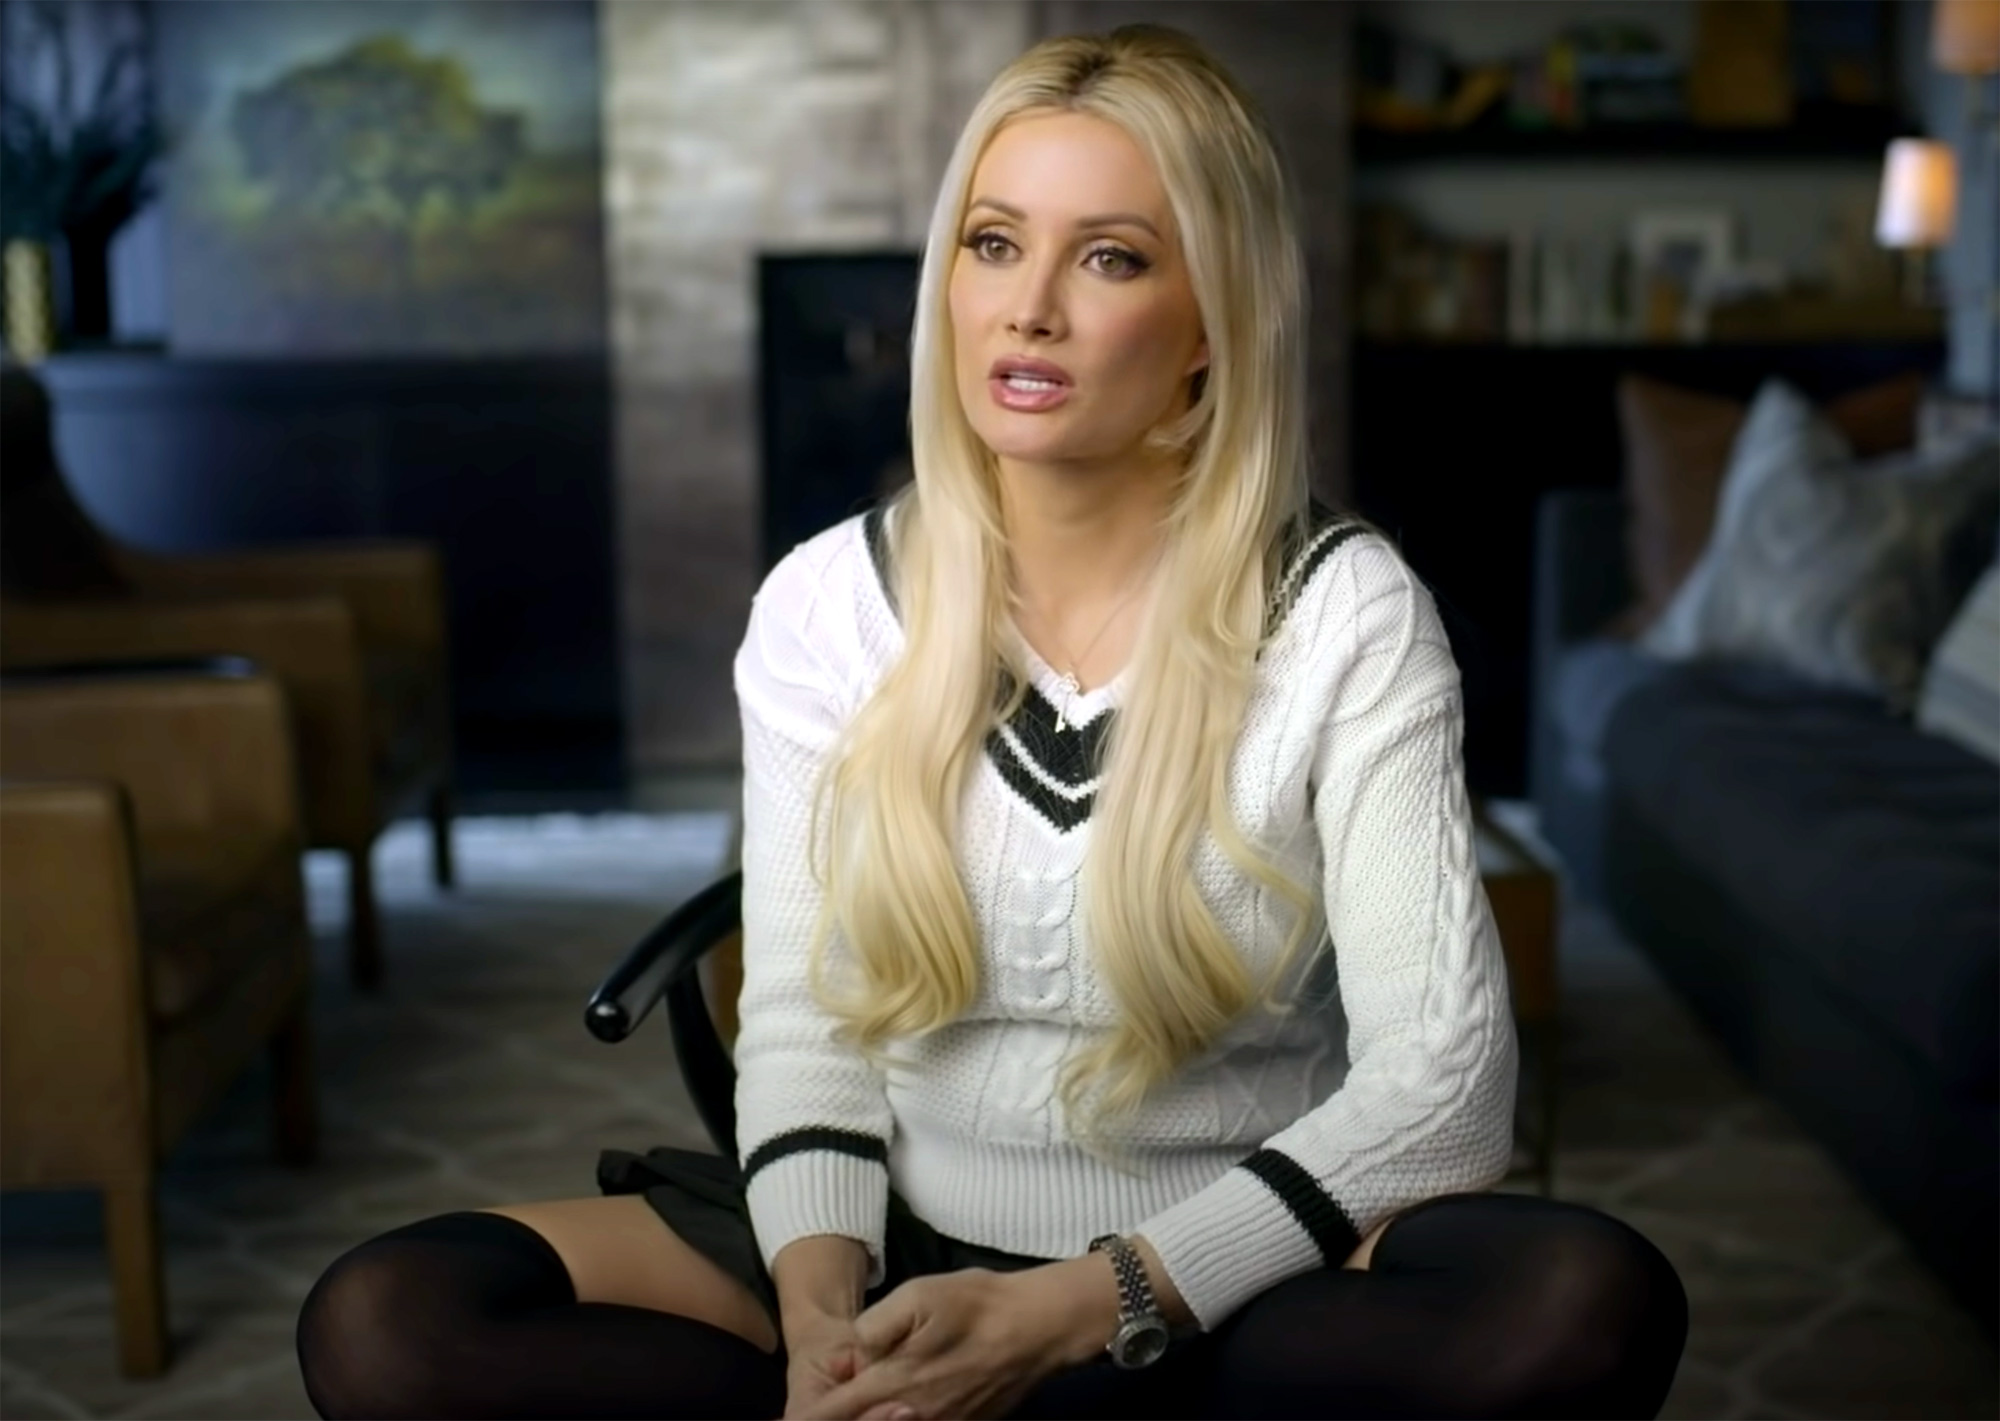 Holly Madison sitting in a chair and wearing white cardigan